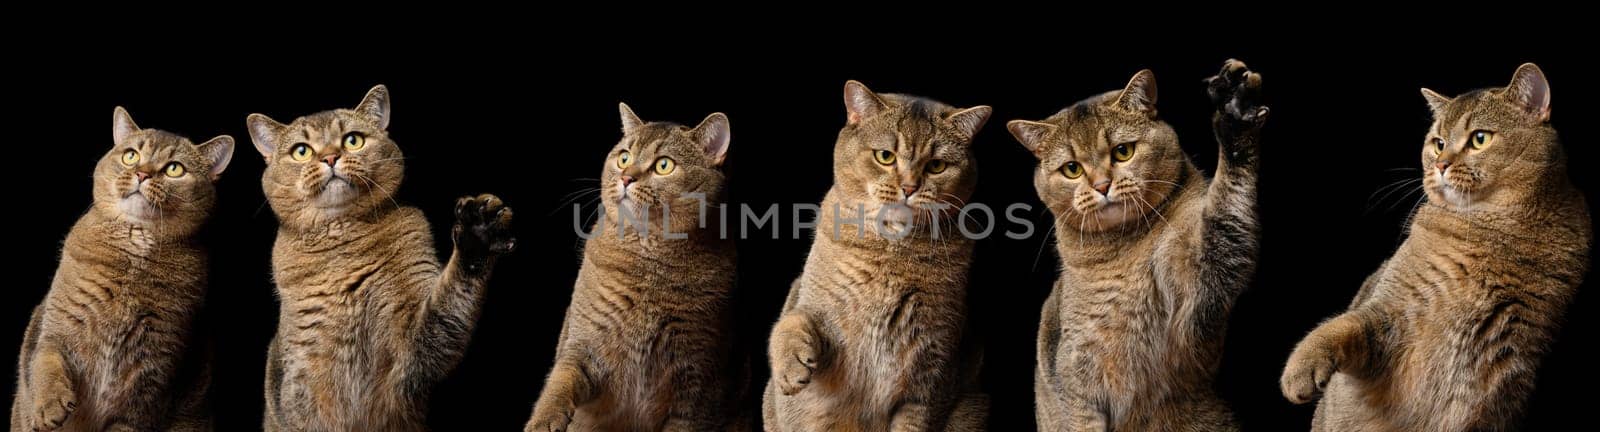 Adult gray cat of breed Scottish Straight with different poses and emotions on a black background, surprised, funny